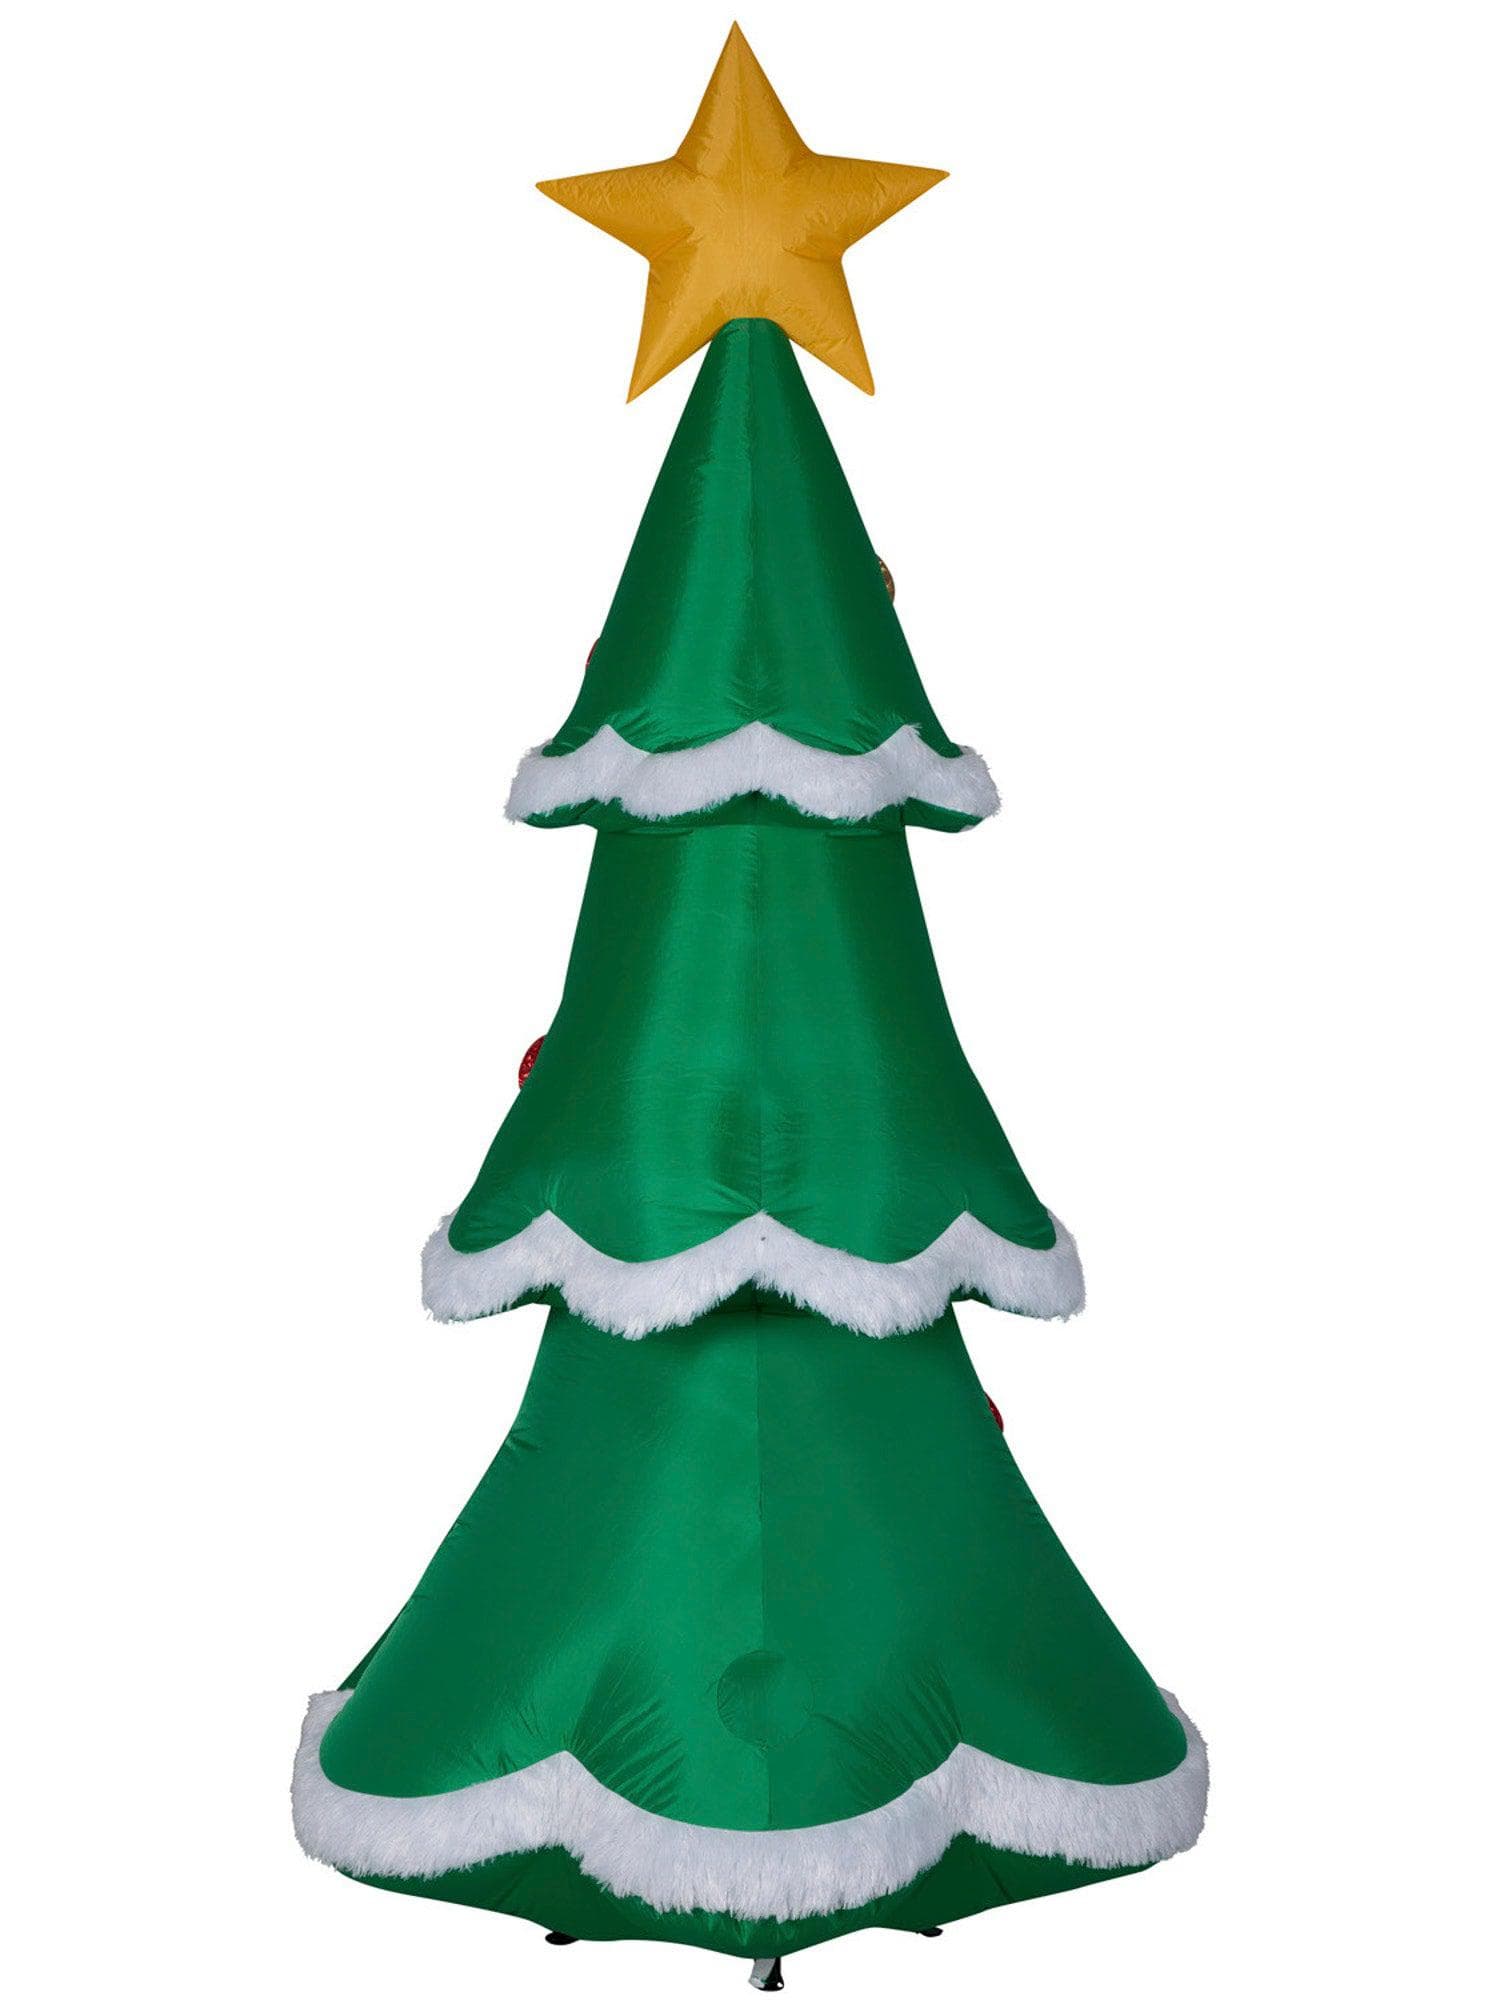 7.5 Foot Tree Light Up Christmas Inflatable Lawn Decor - costumes.com